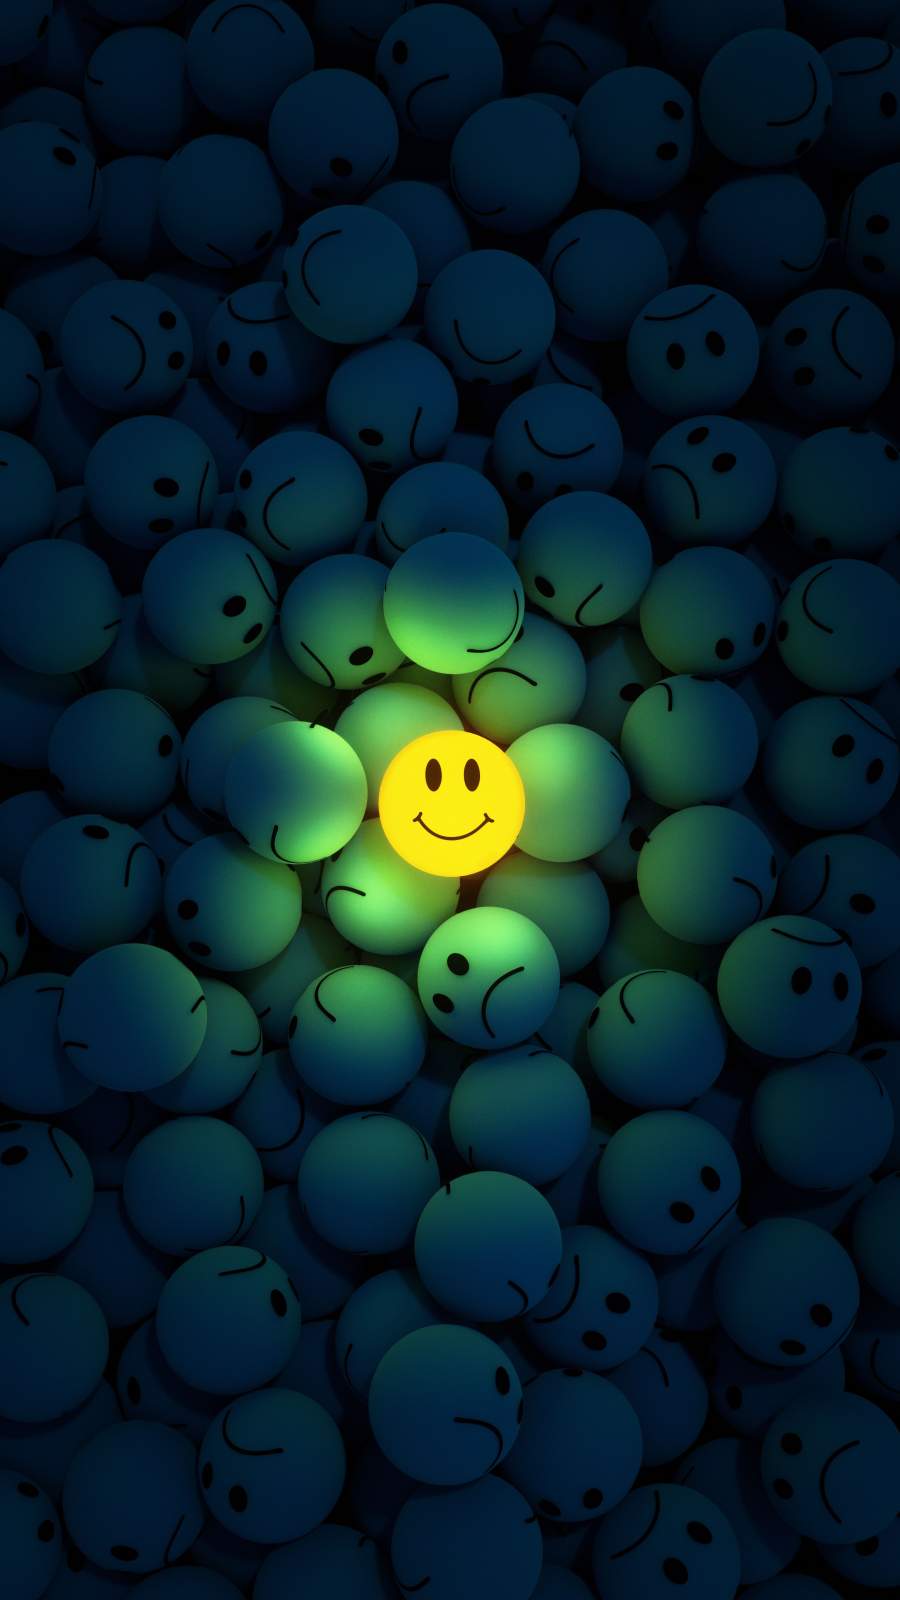 Smile IPhone Wallpaper - IPhone Wallpapers : iPhone Wallpapers